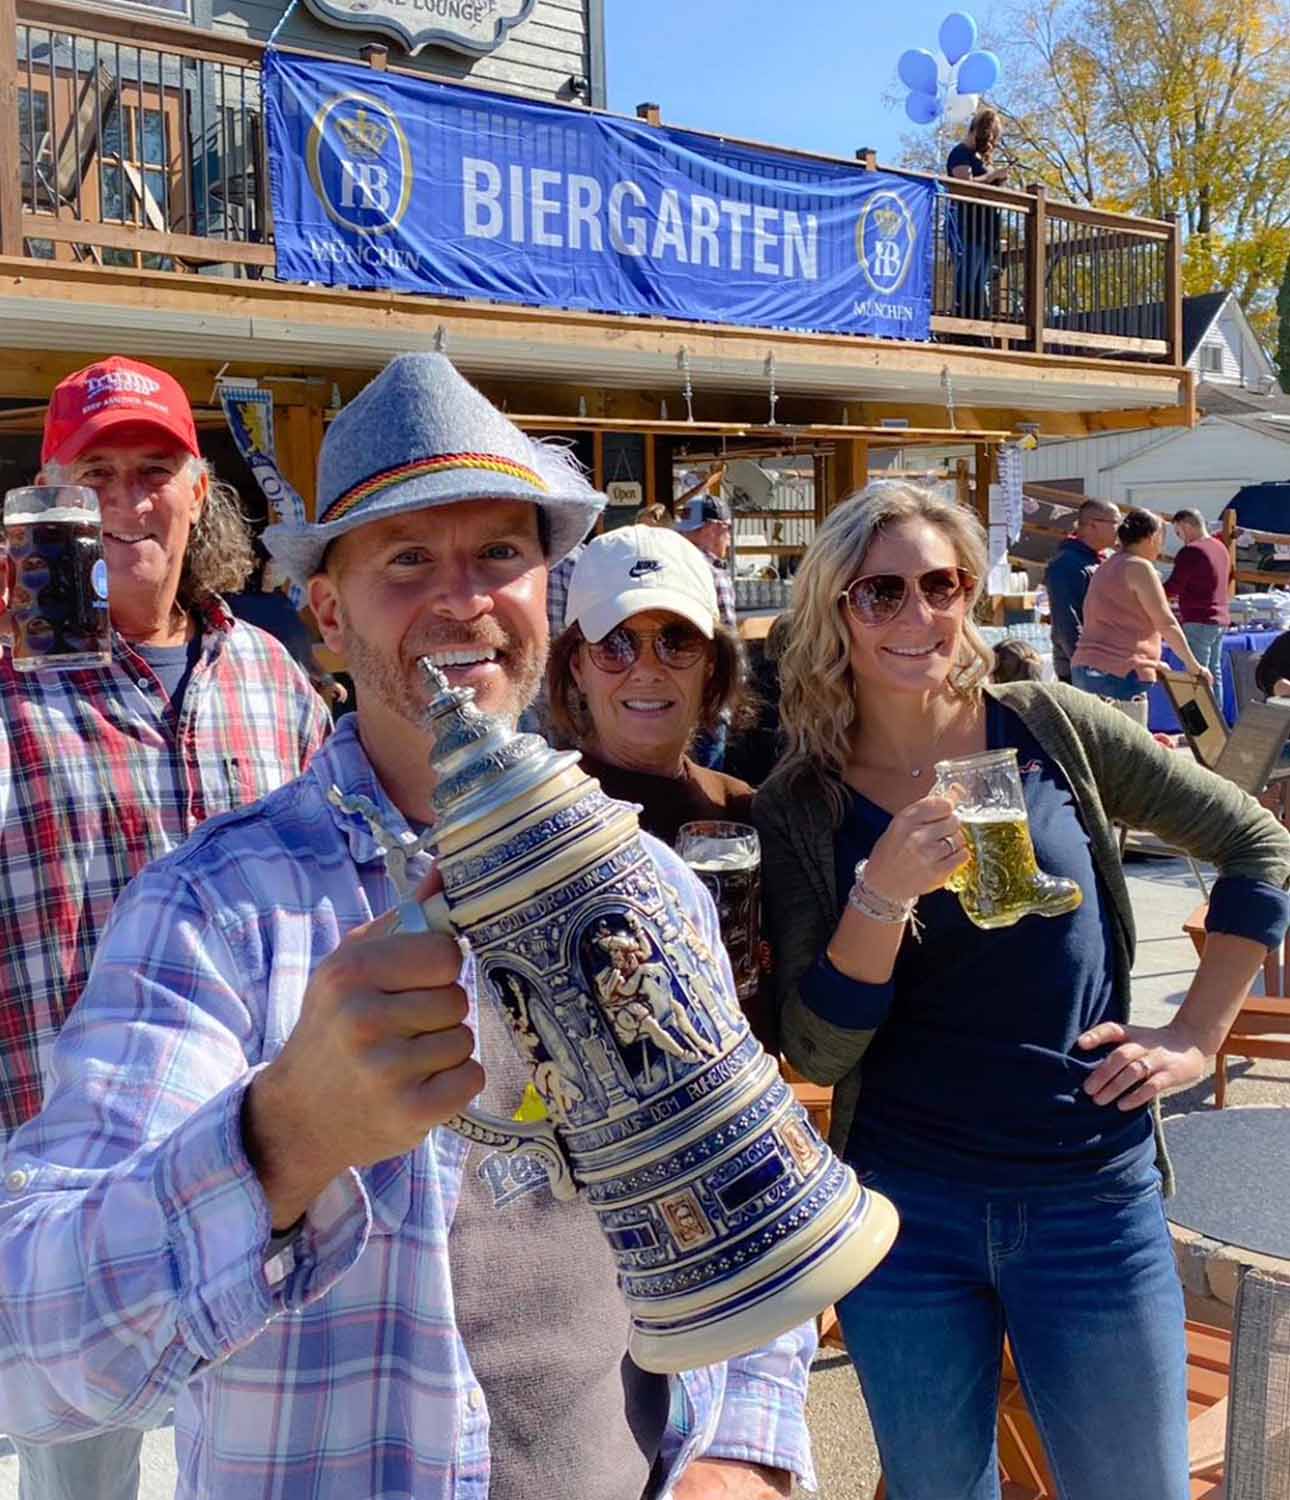 People holding up tankards of beer on a patio under an Oktoberfest banner at Horvath's Harbor, Thornville, Perry County, Ohio.